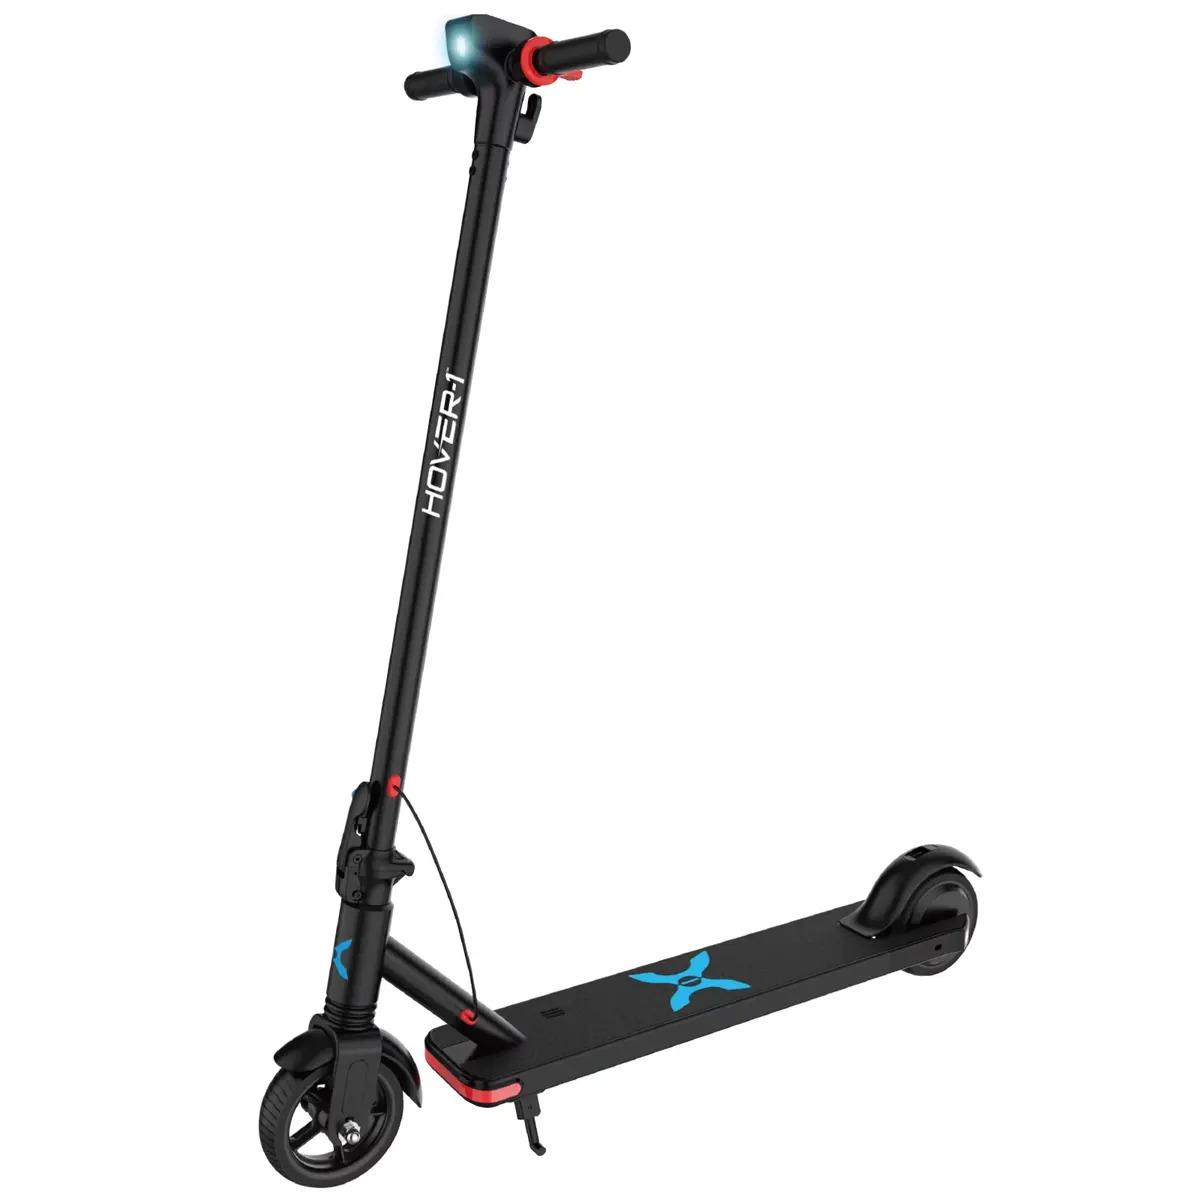 Hover-1 Highlander Foldable Electric Scooter for $148 Shipped